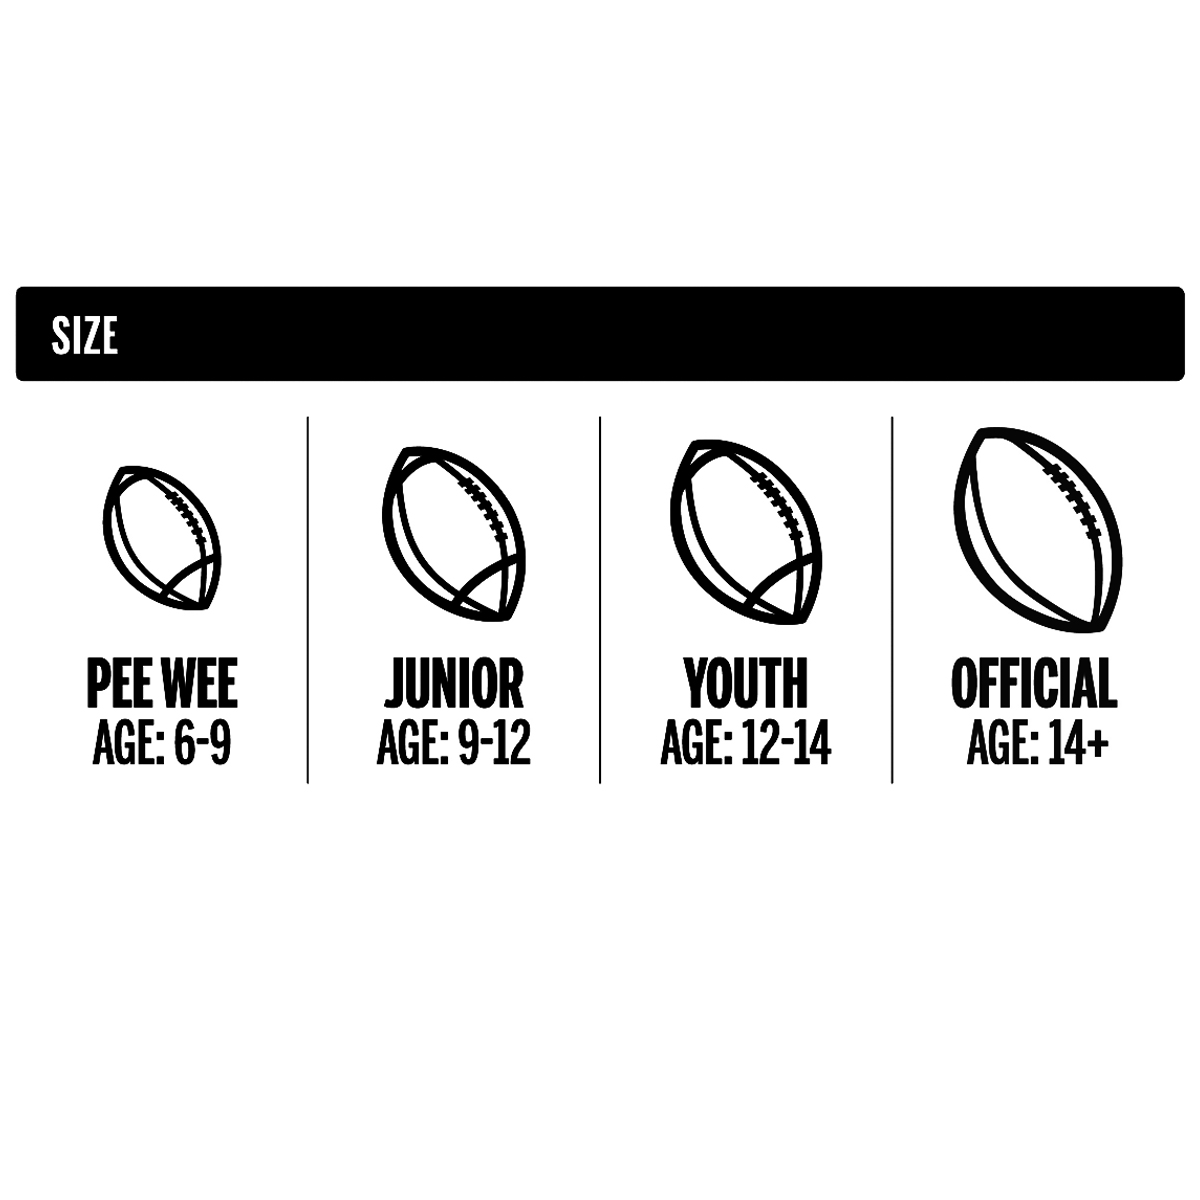 Wilson NFL Ultimate Composite Football, Official Size - image 3 of 3